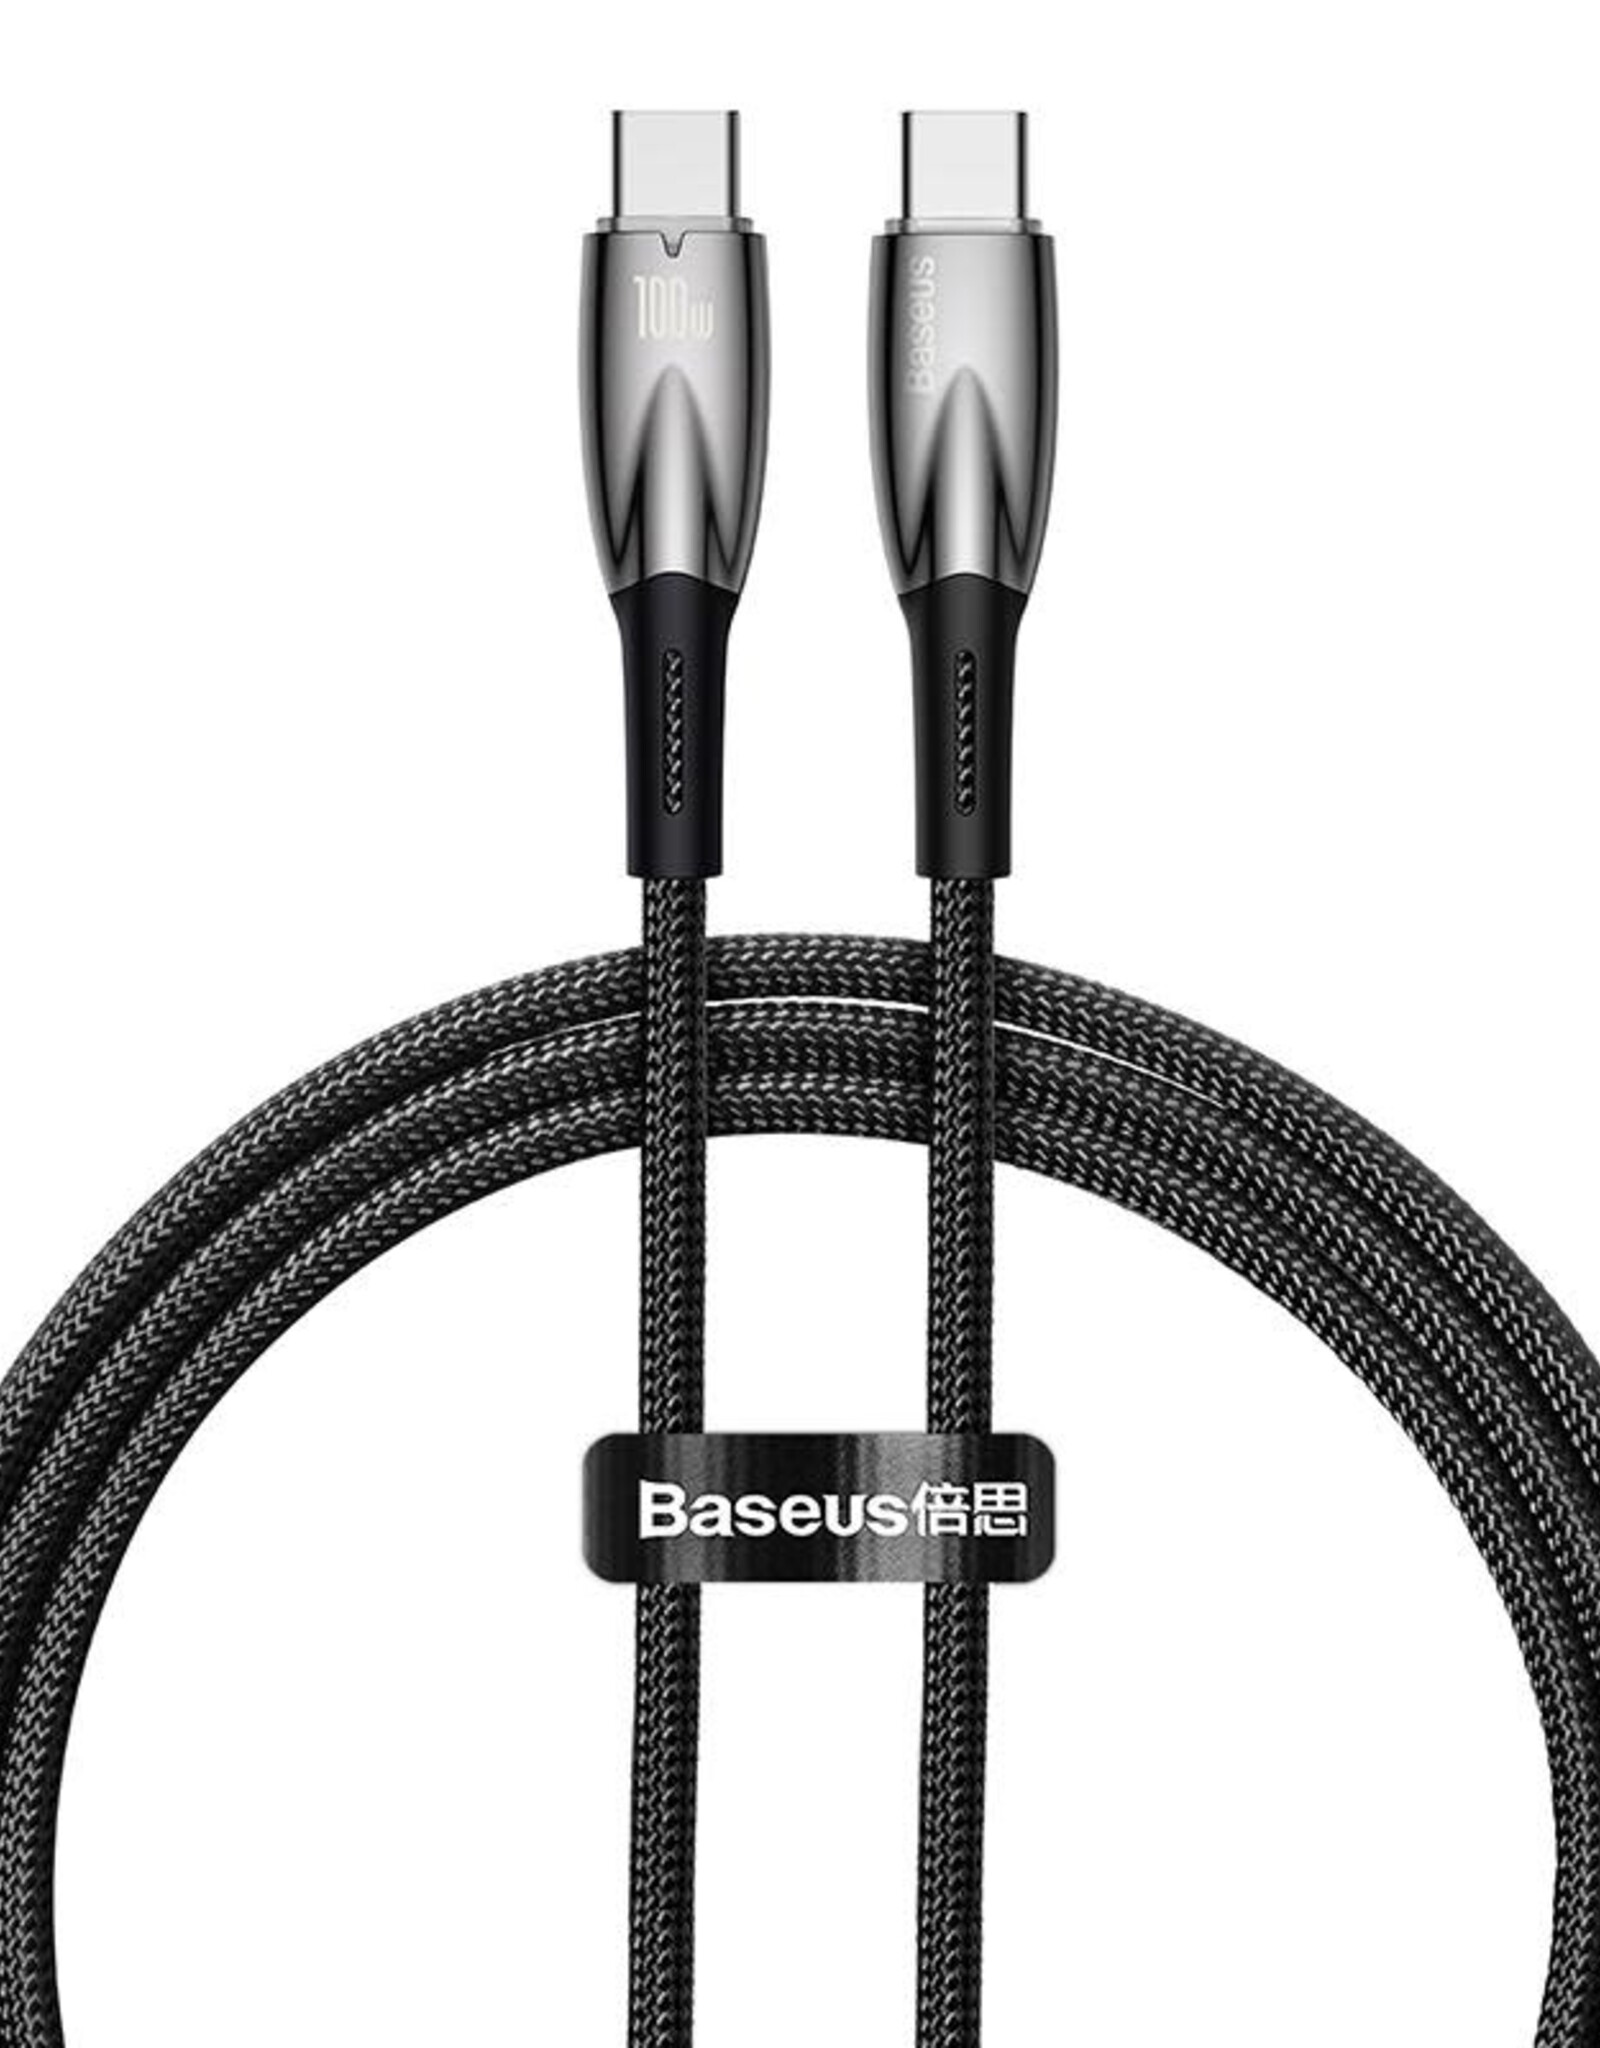 Baseus 100w Glimmer Charging Data Cable type c to type c 2m black